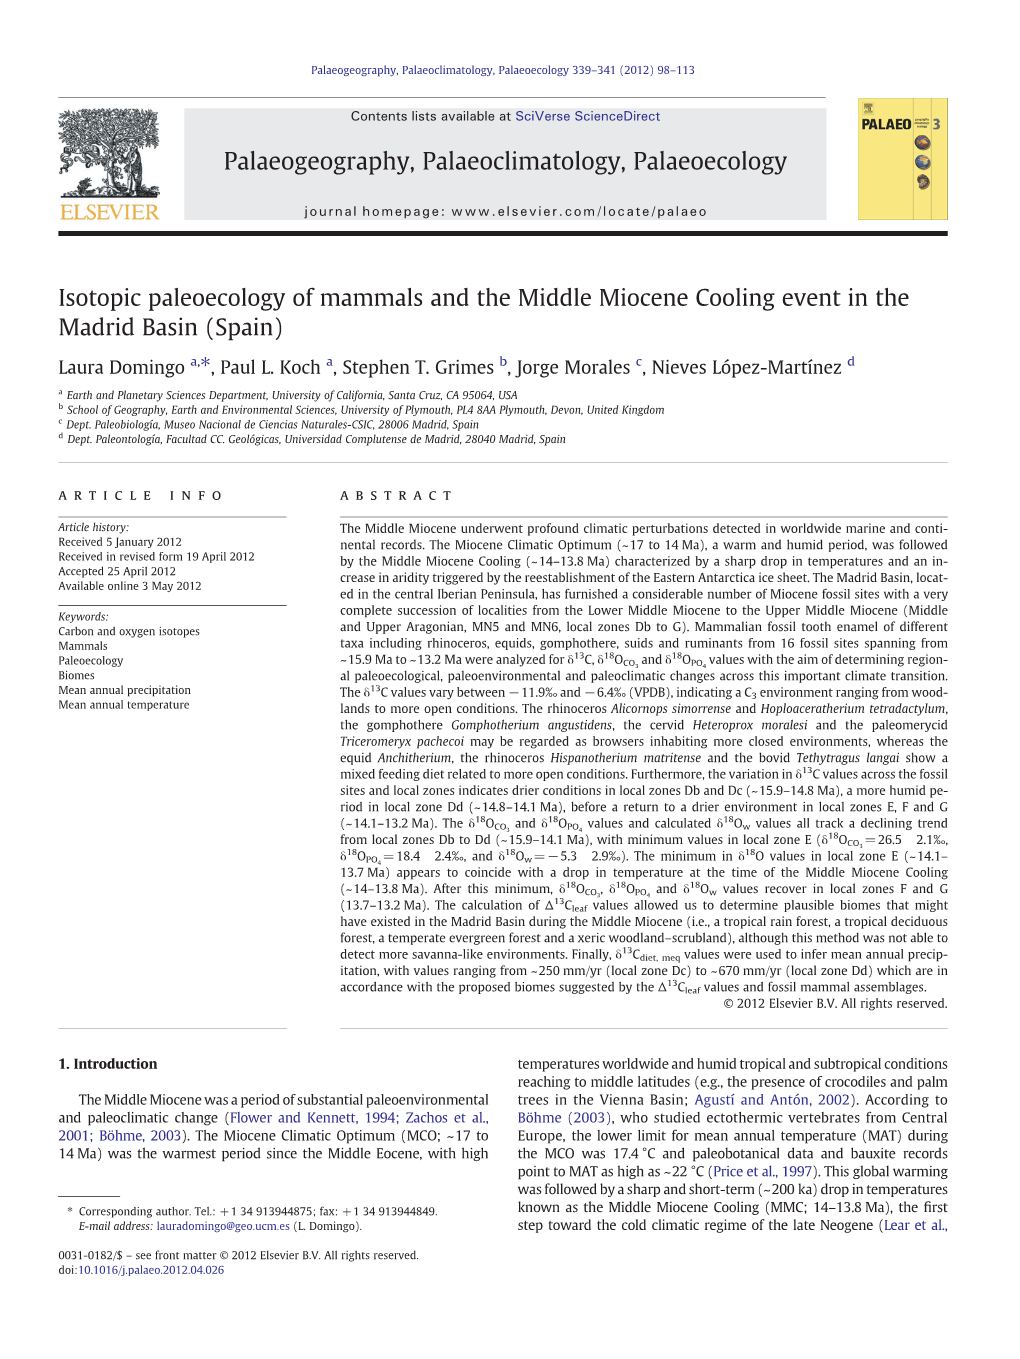 Isotopic Paleoecology of Mammals and the Middle Miocene Cooling Event in the Madrid Basin (Spain)